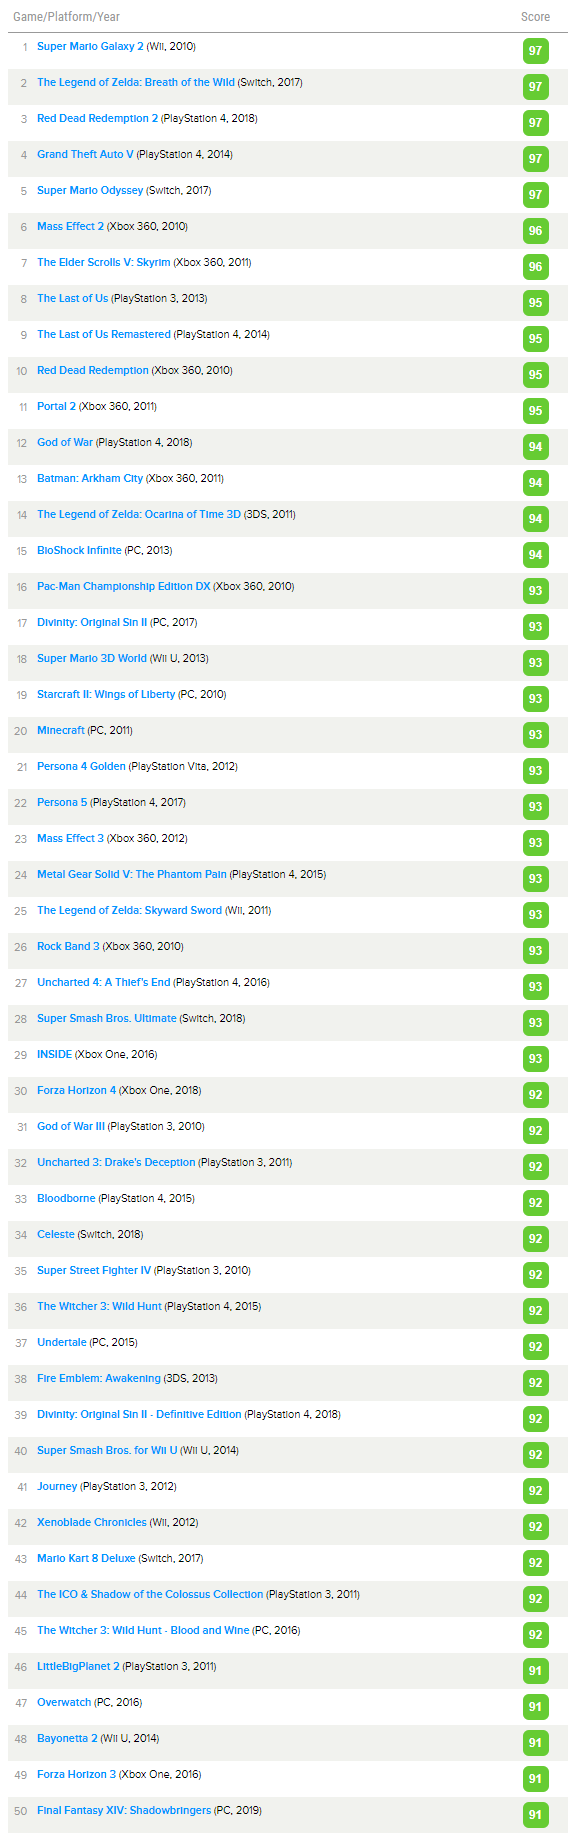 FireShot Capture 080 - The Best Video Games of the Decade (2010-19), According to Game Criti_ - www.metacritic.com.png